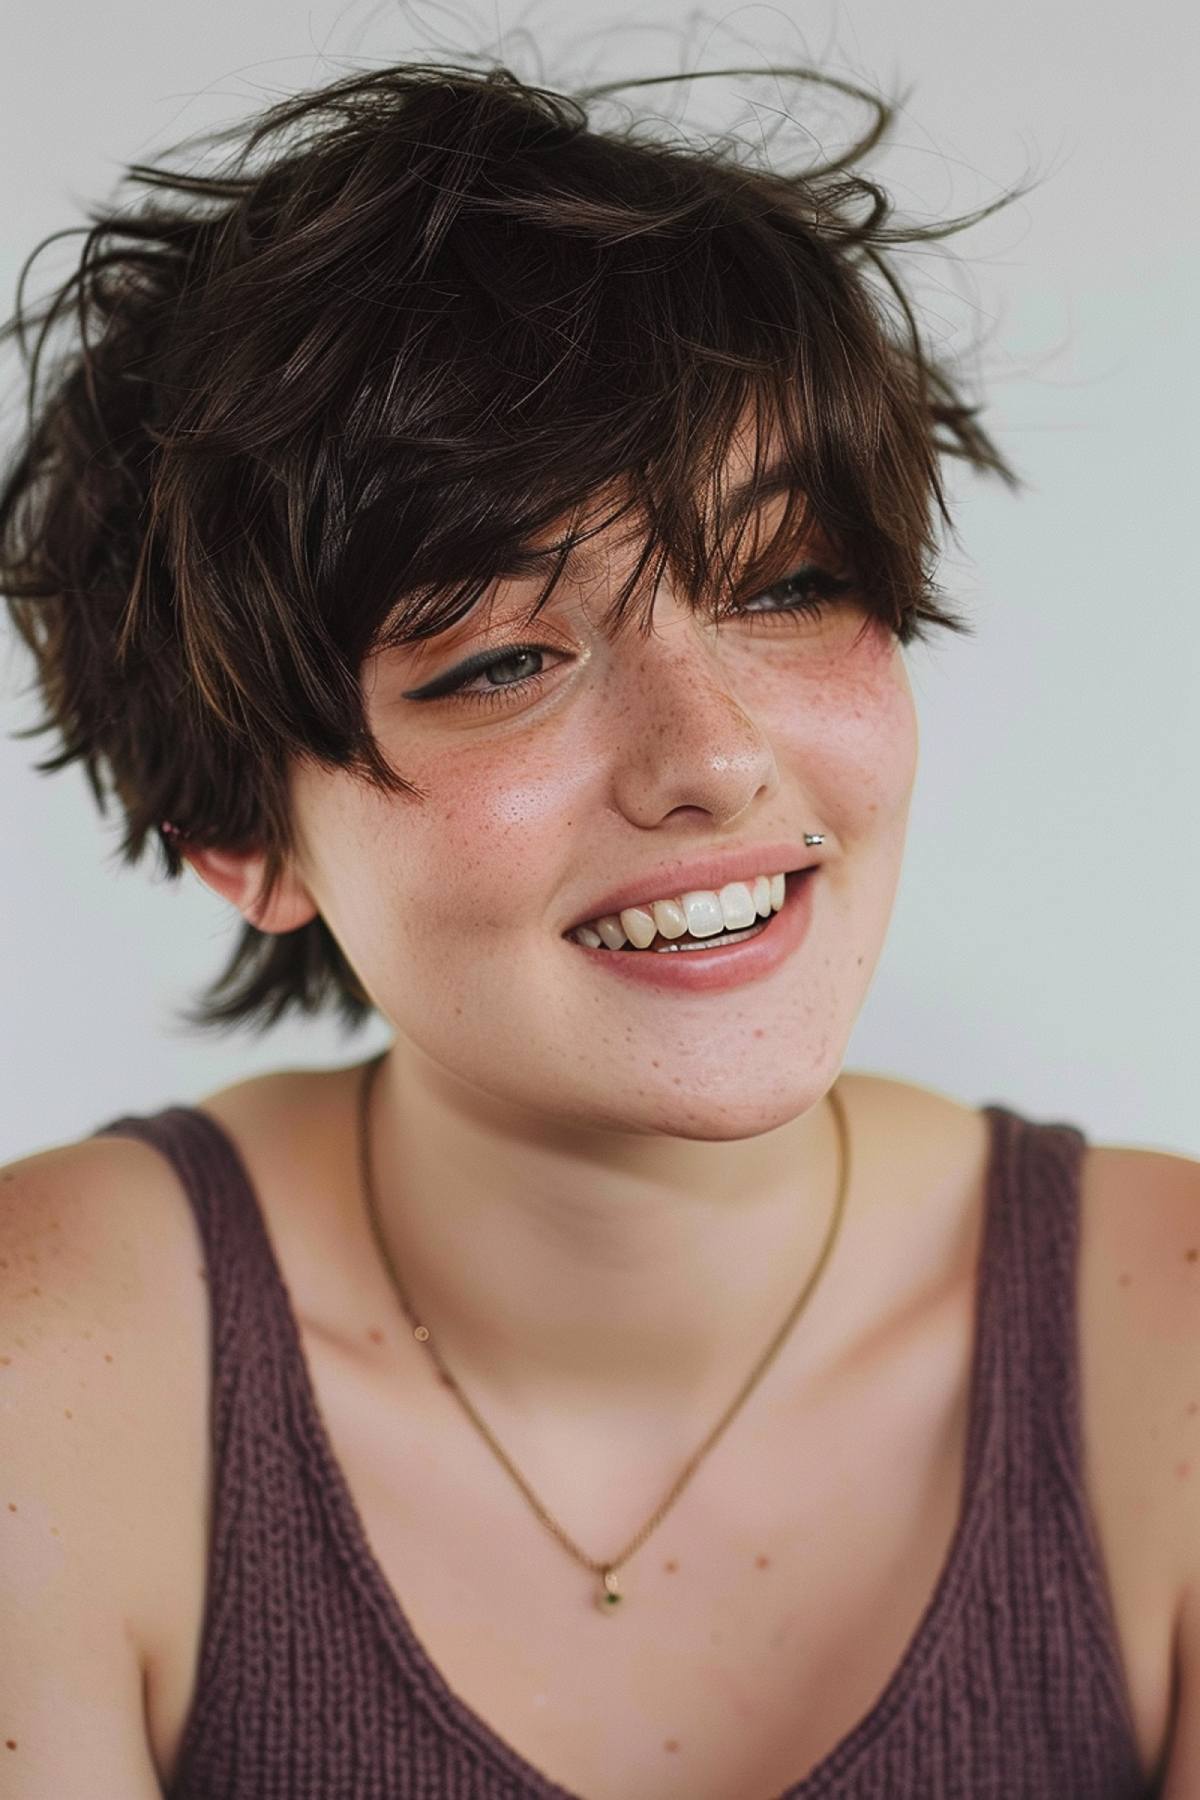 Young woman with playful pixie cut and fluffy feathered fringe